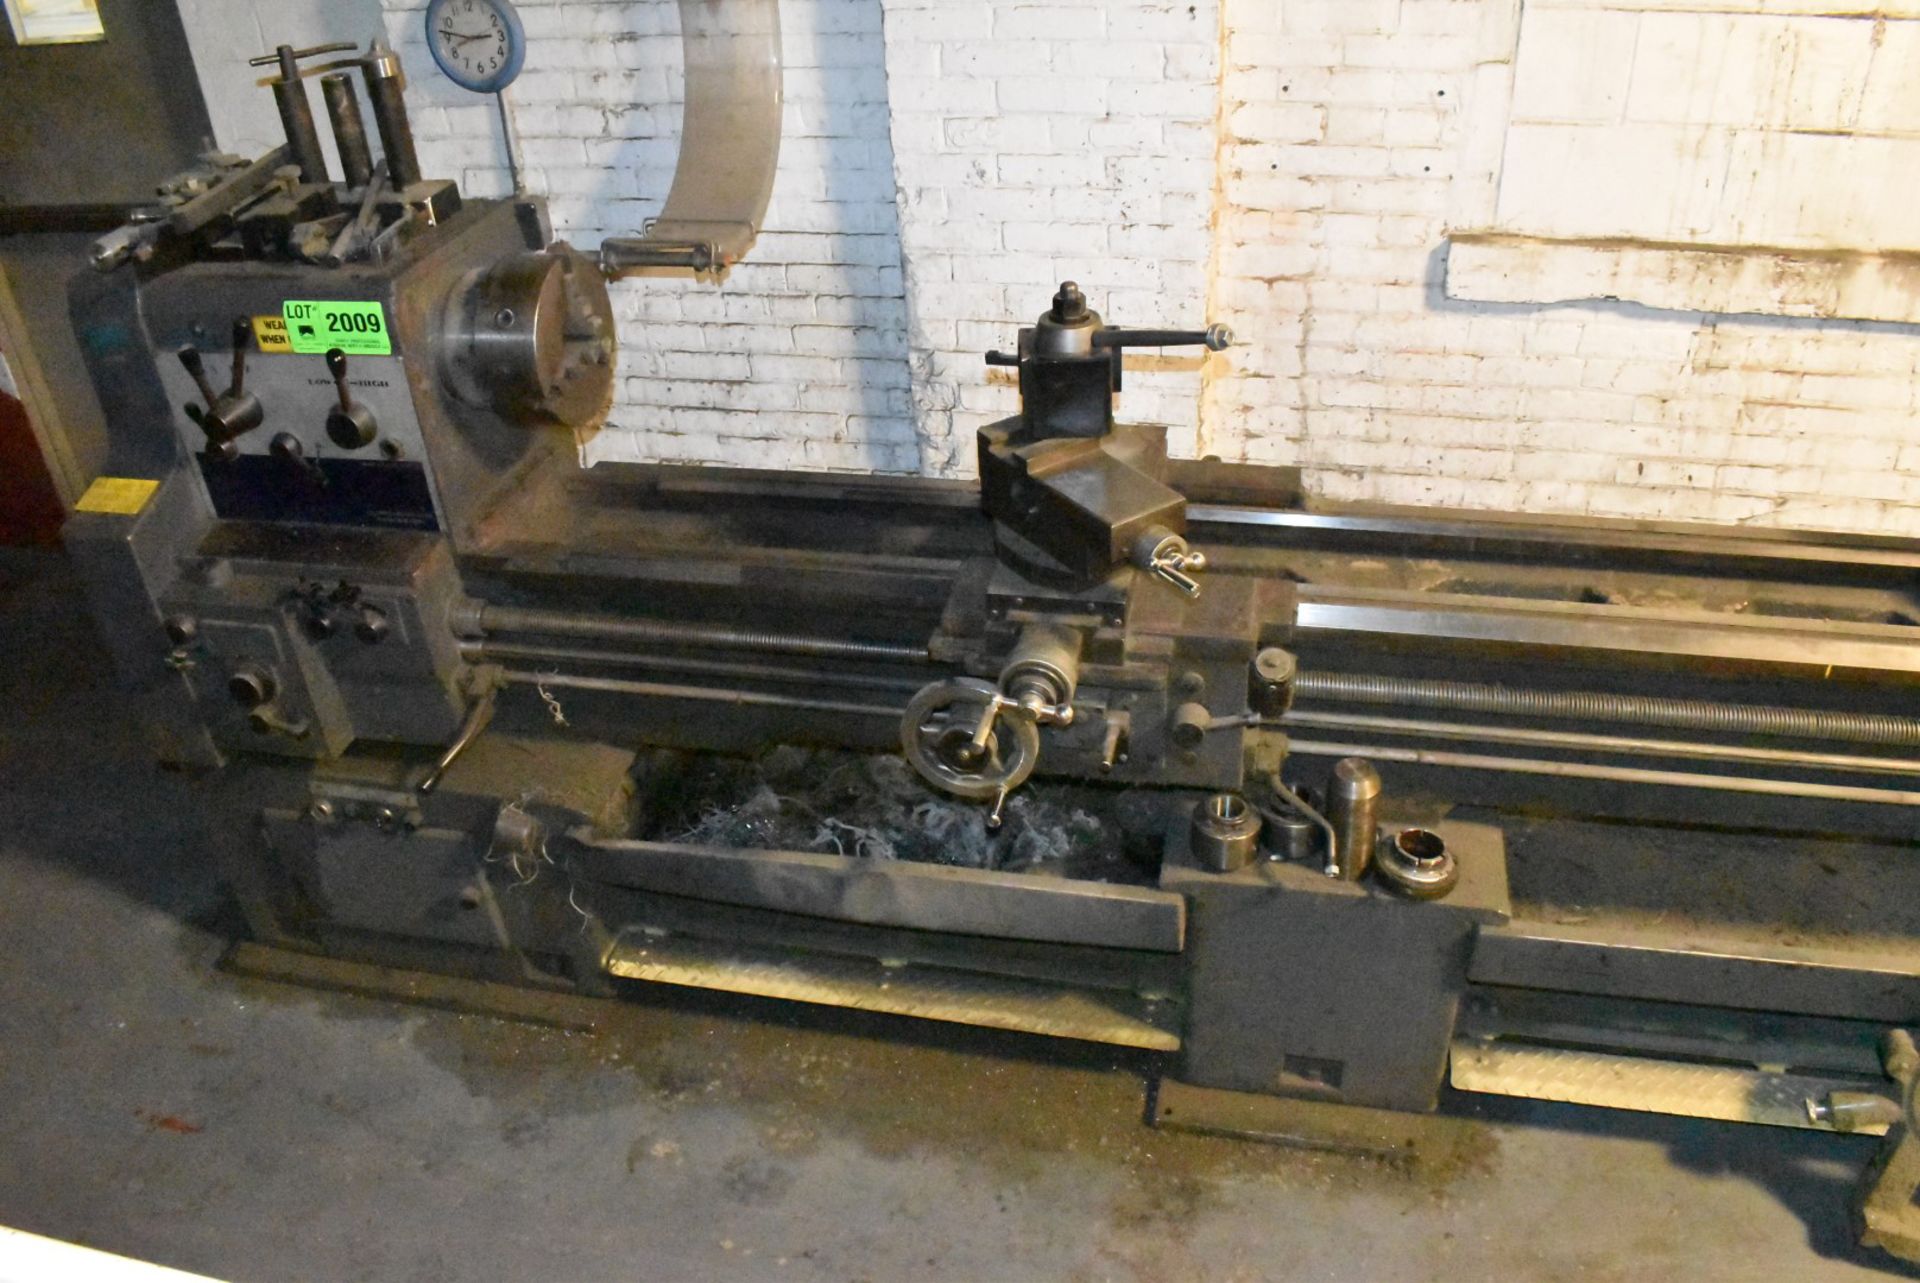 JET JE24X100 GAP BED ENGINE LATHE WITH 24" SWING OVER BED, 33" SWING IN THE GAP, 100" BETWEEN - Image 3 of 12